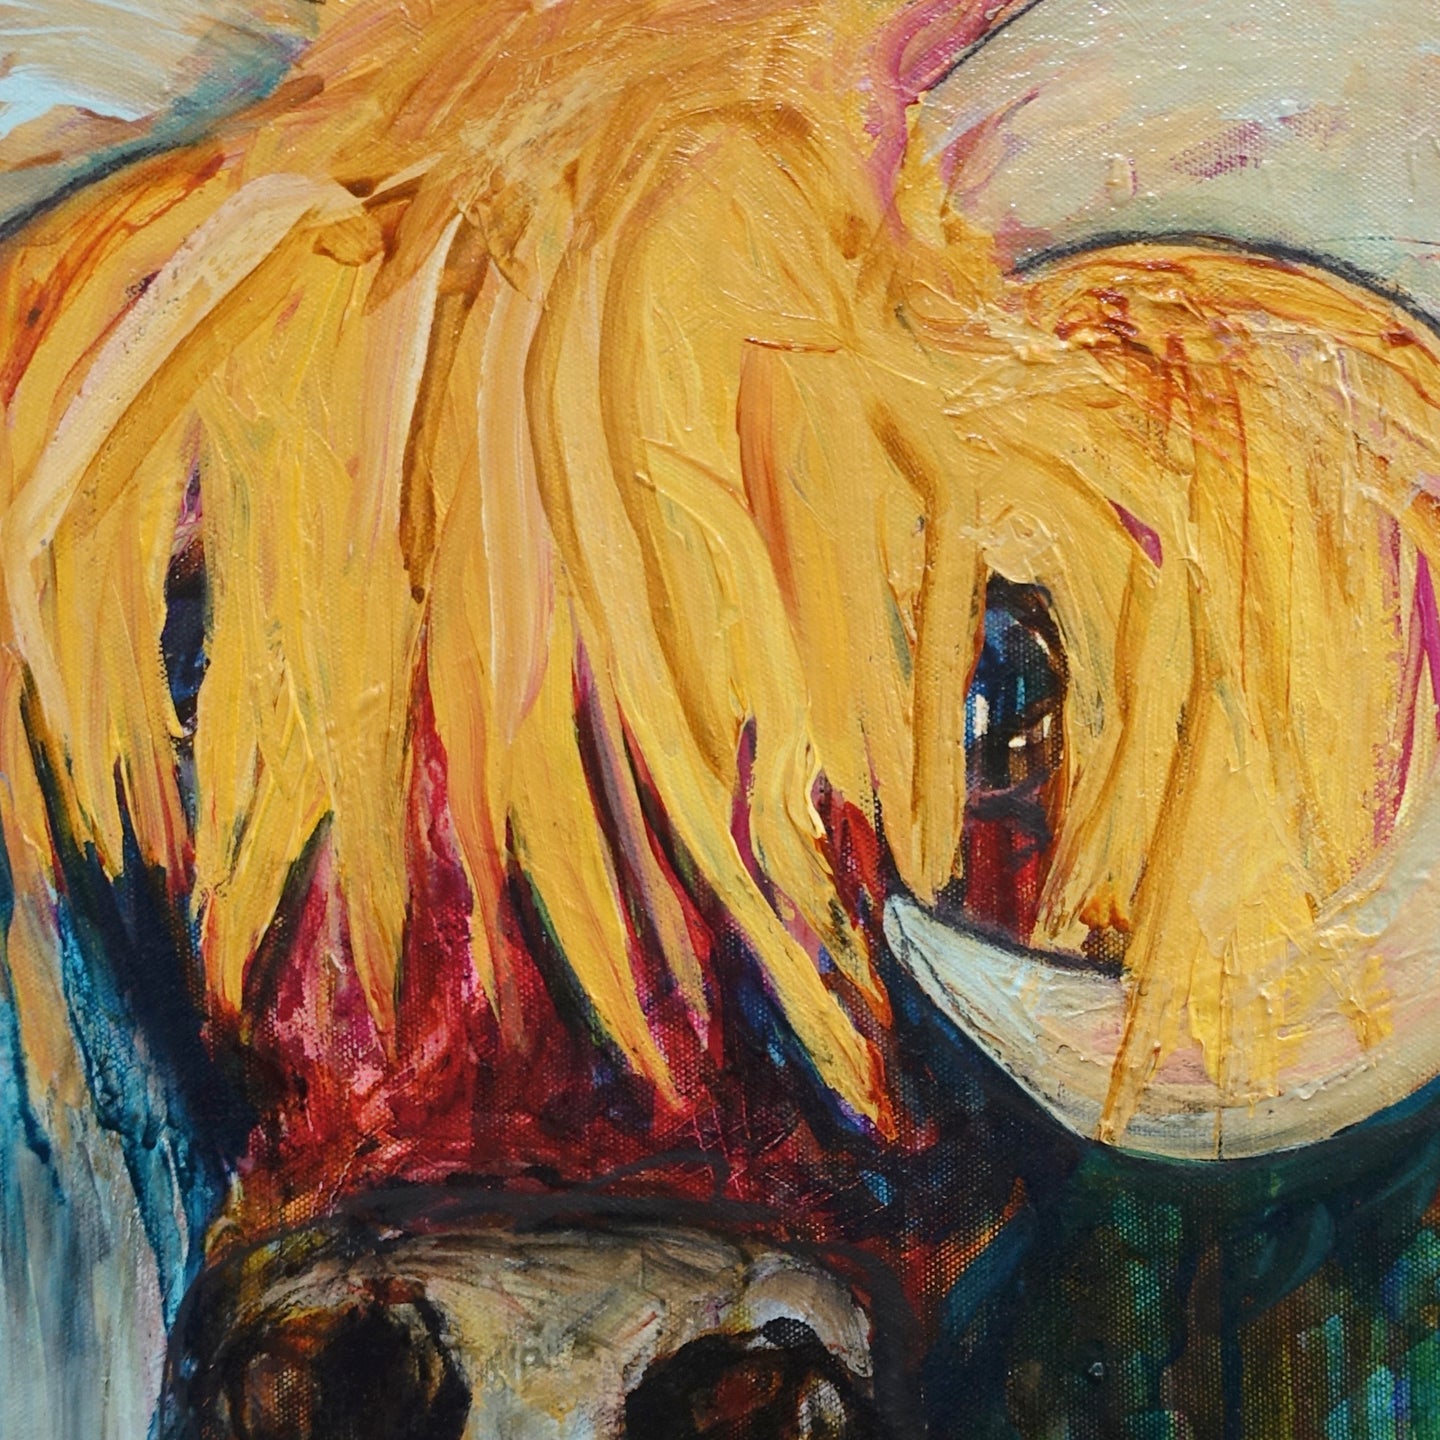 Blondie is a painting of a gorgeous bovine with long blonde hair.